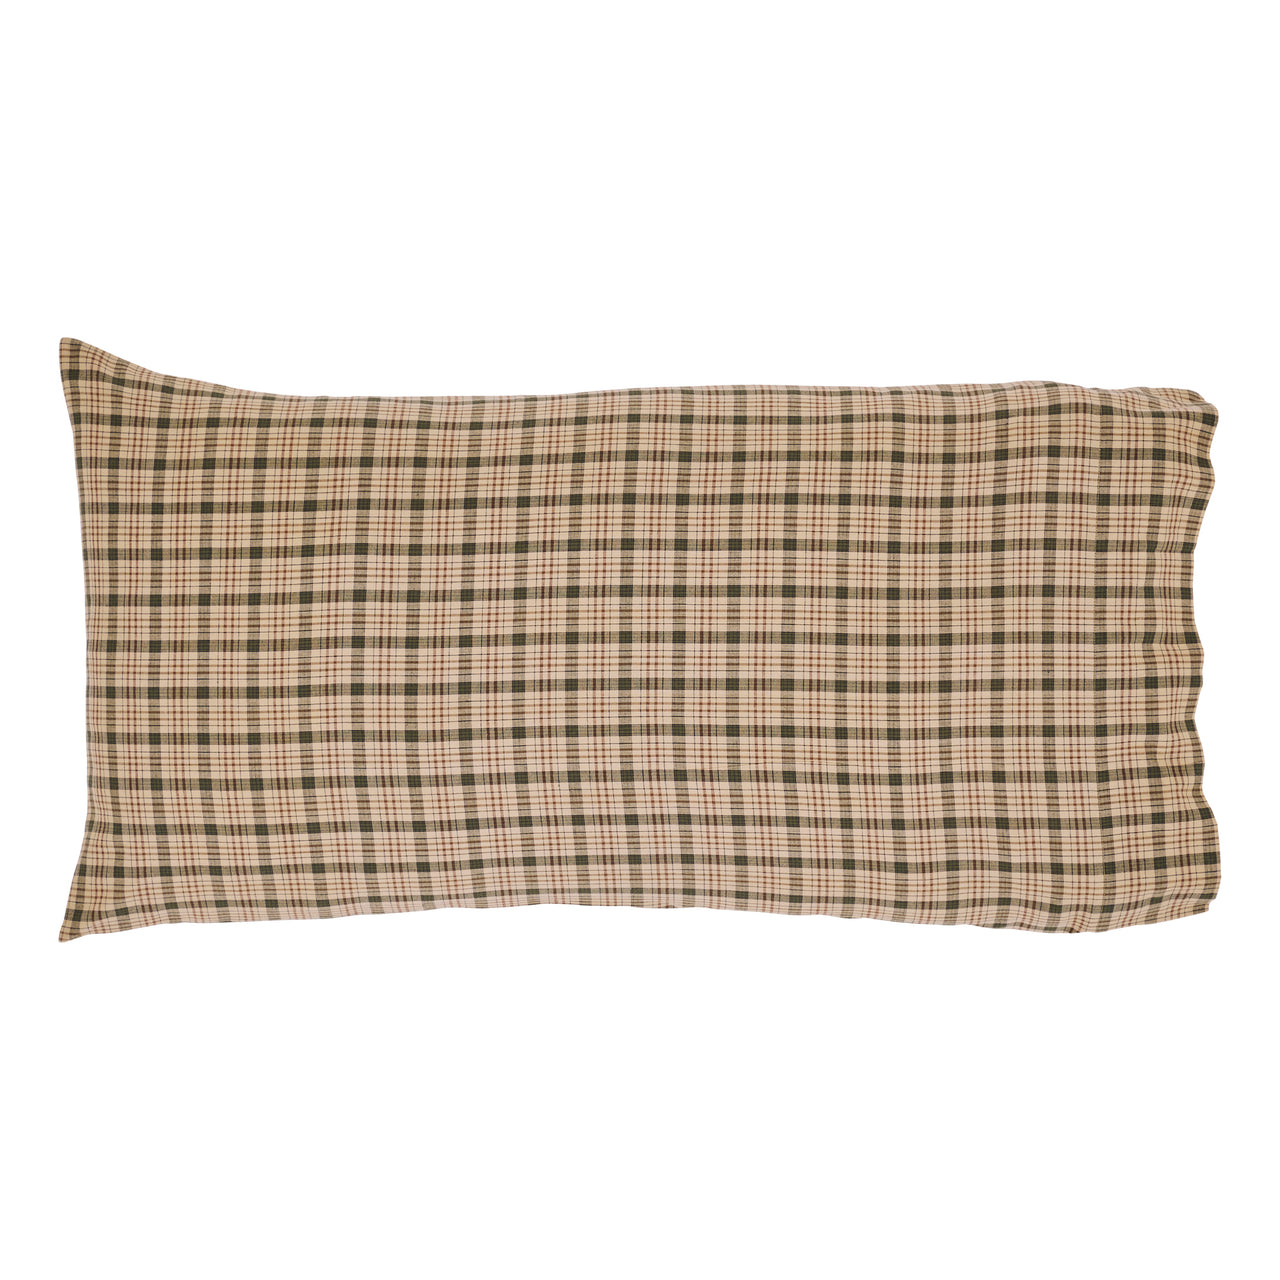 Cider Mill King Pillow Case Set of 2 21x40 VHC Brands